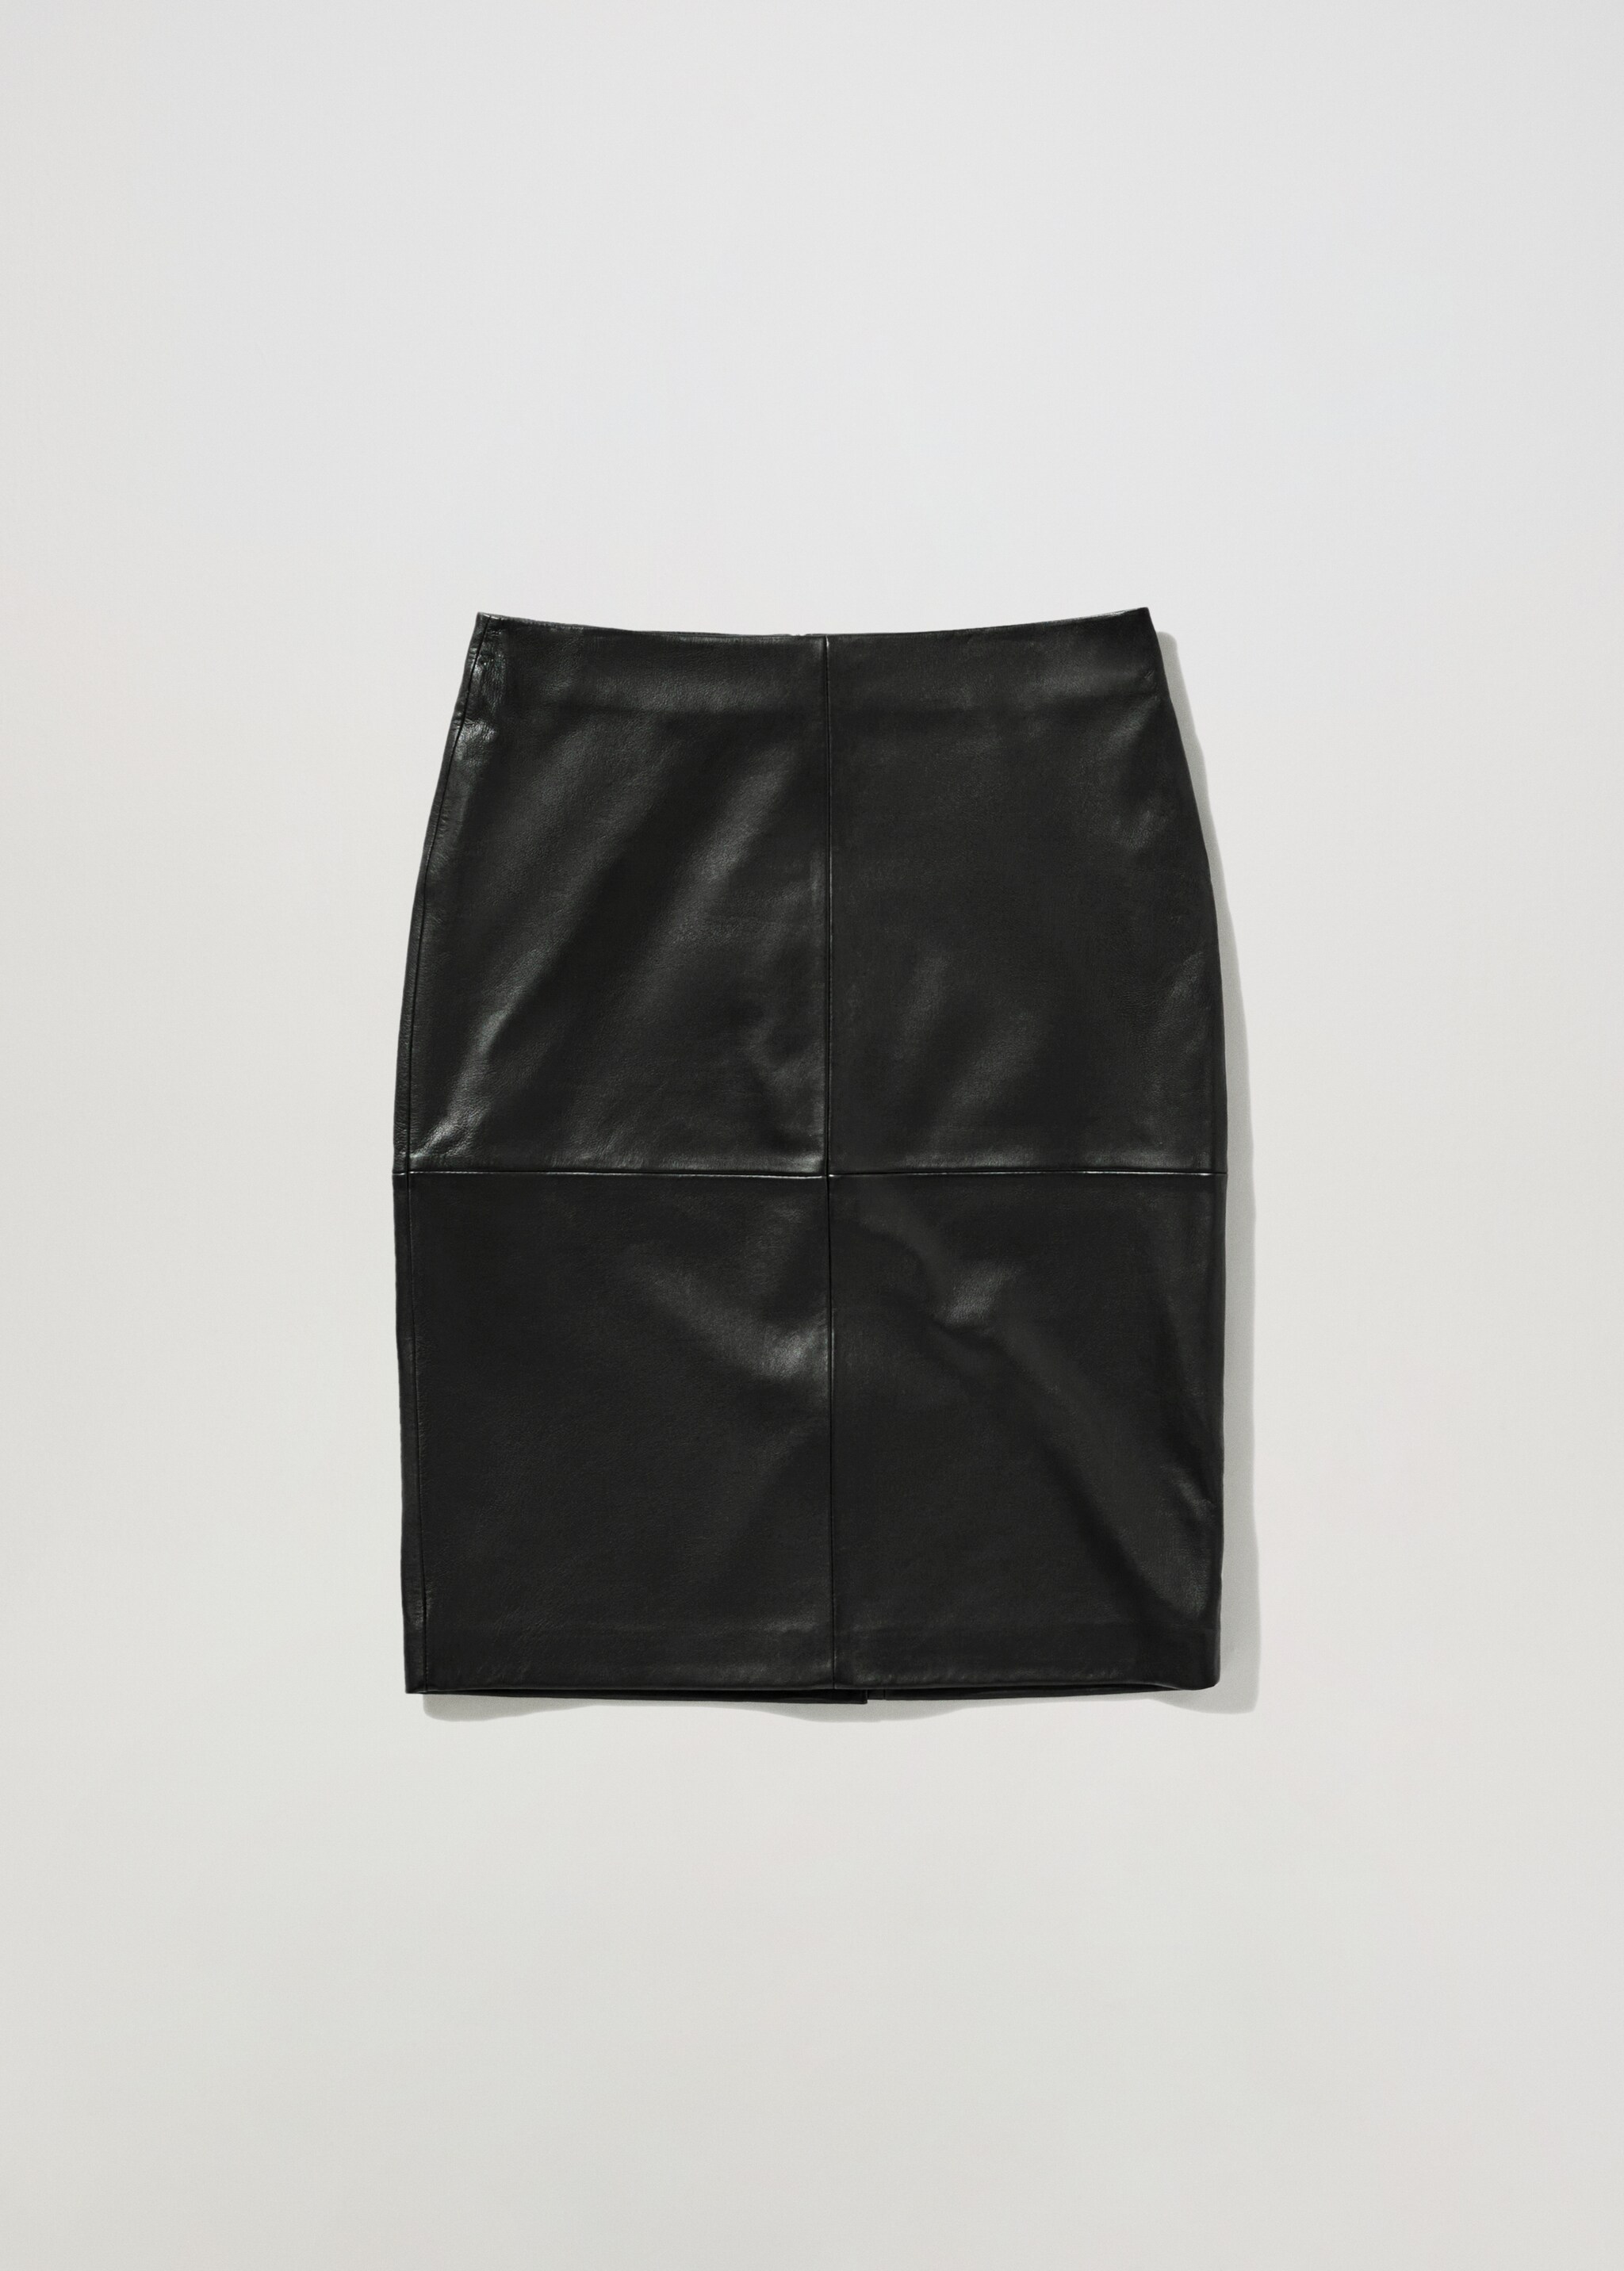 100% leather midi skirt - Article without model